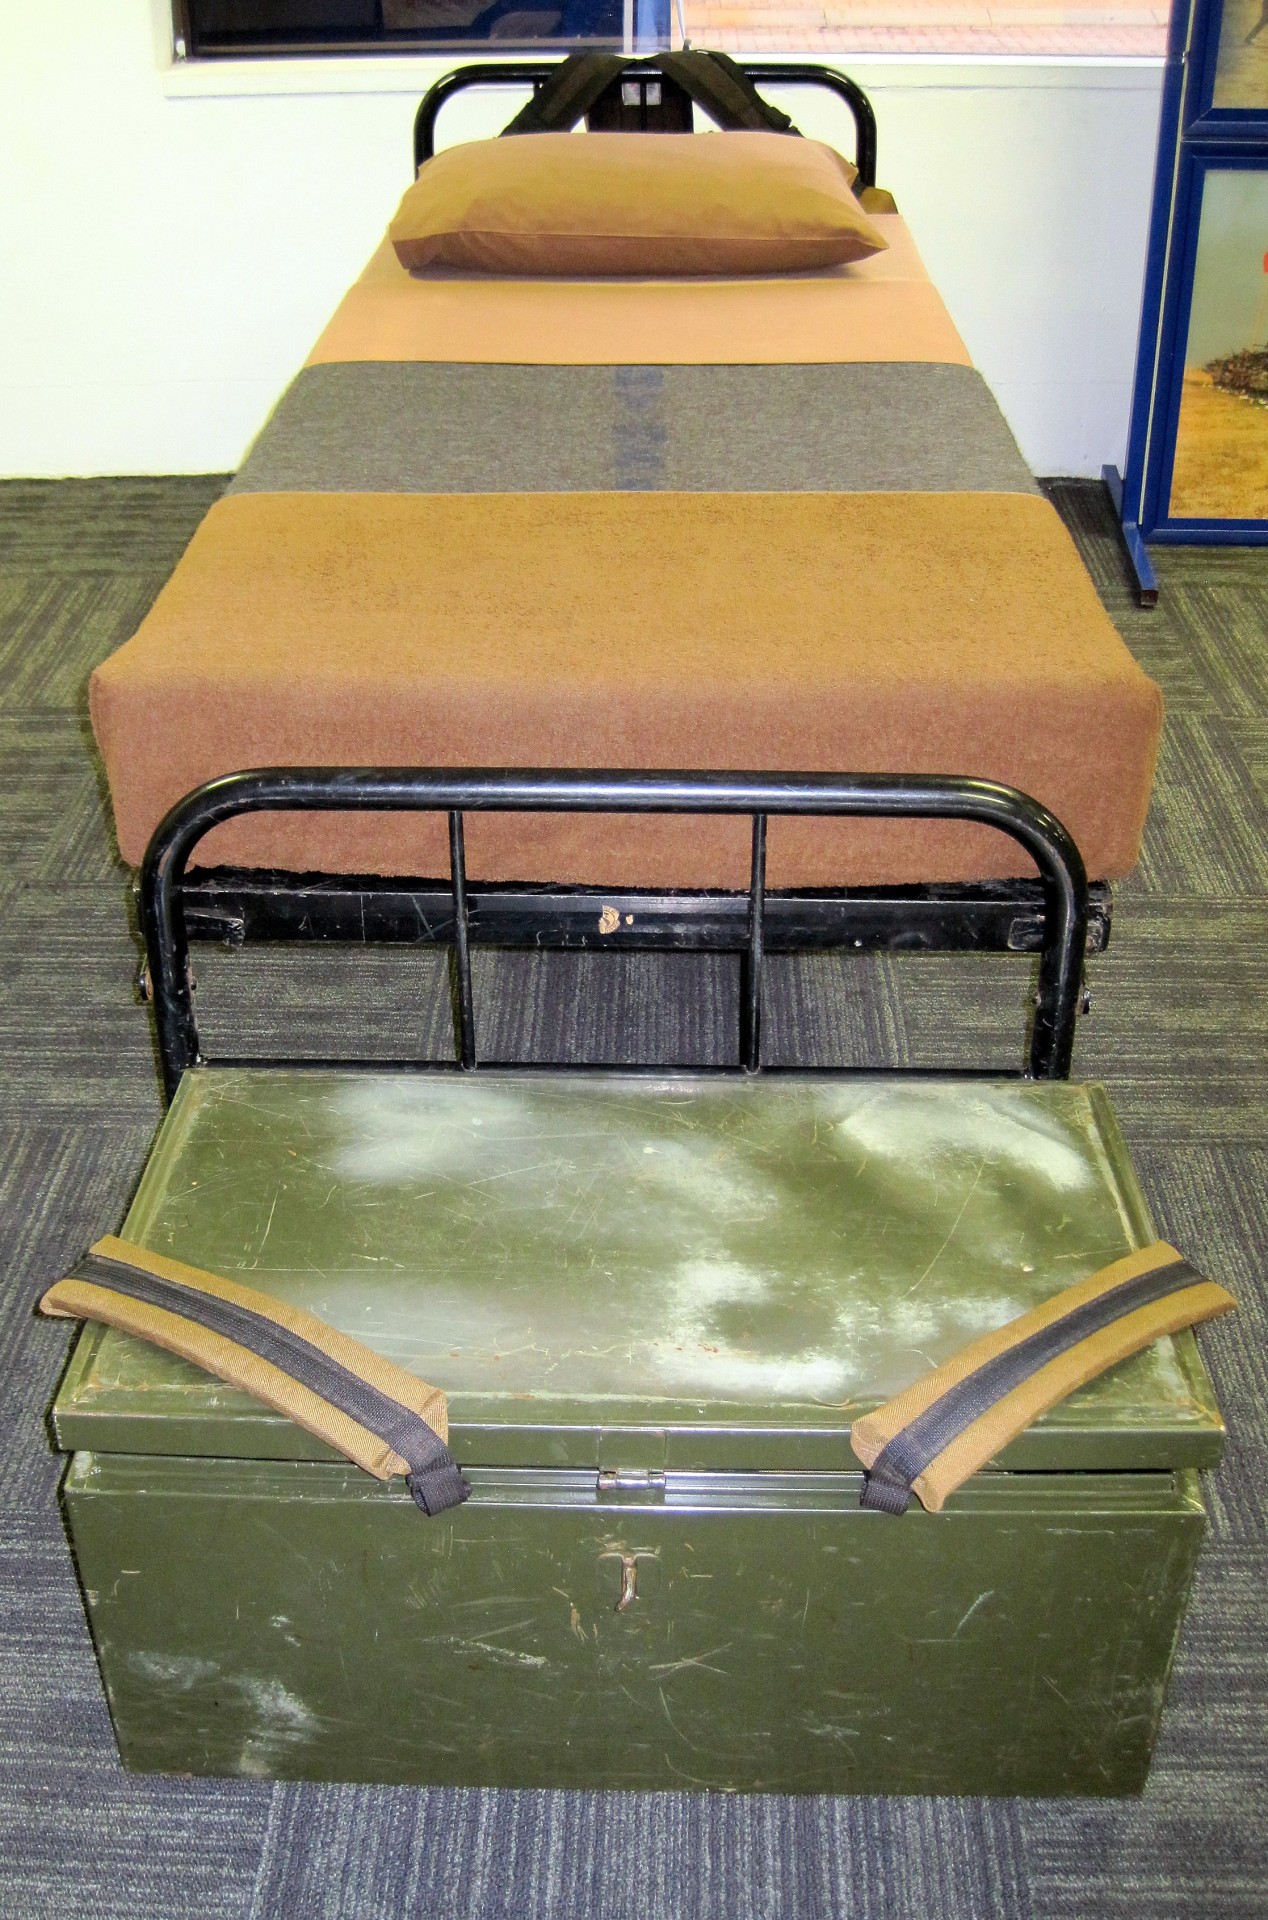 Bed And Trunk Of Conscript